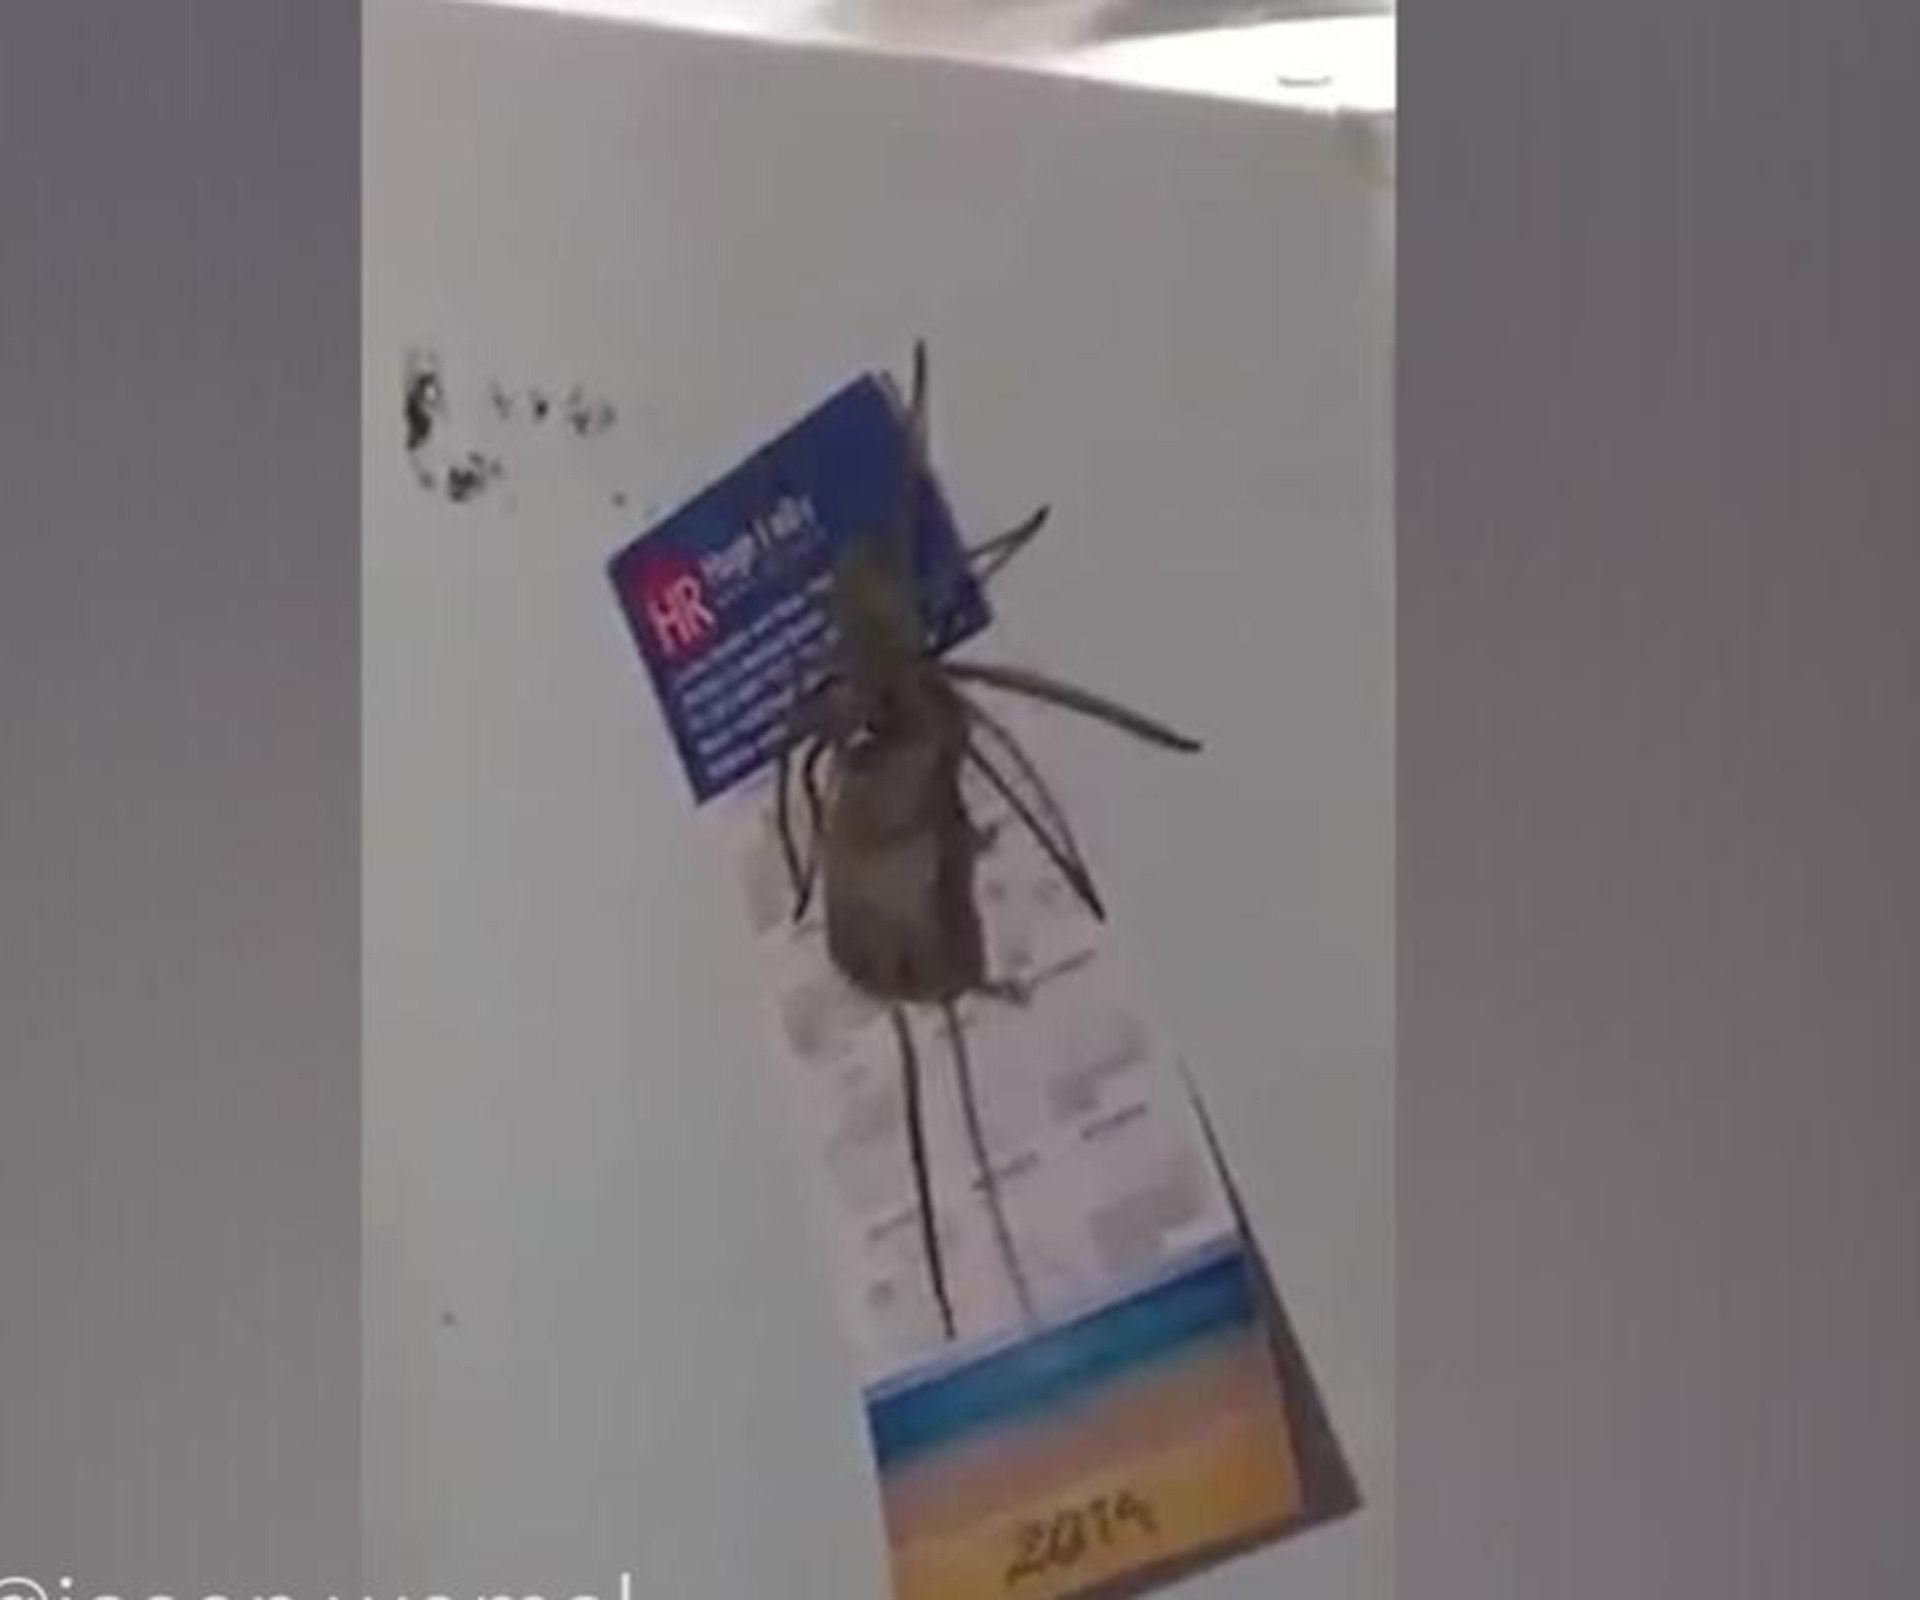 Huge huntsman spider caught trying to eat a mouse